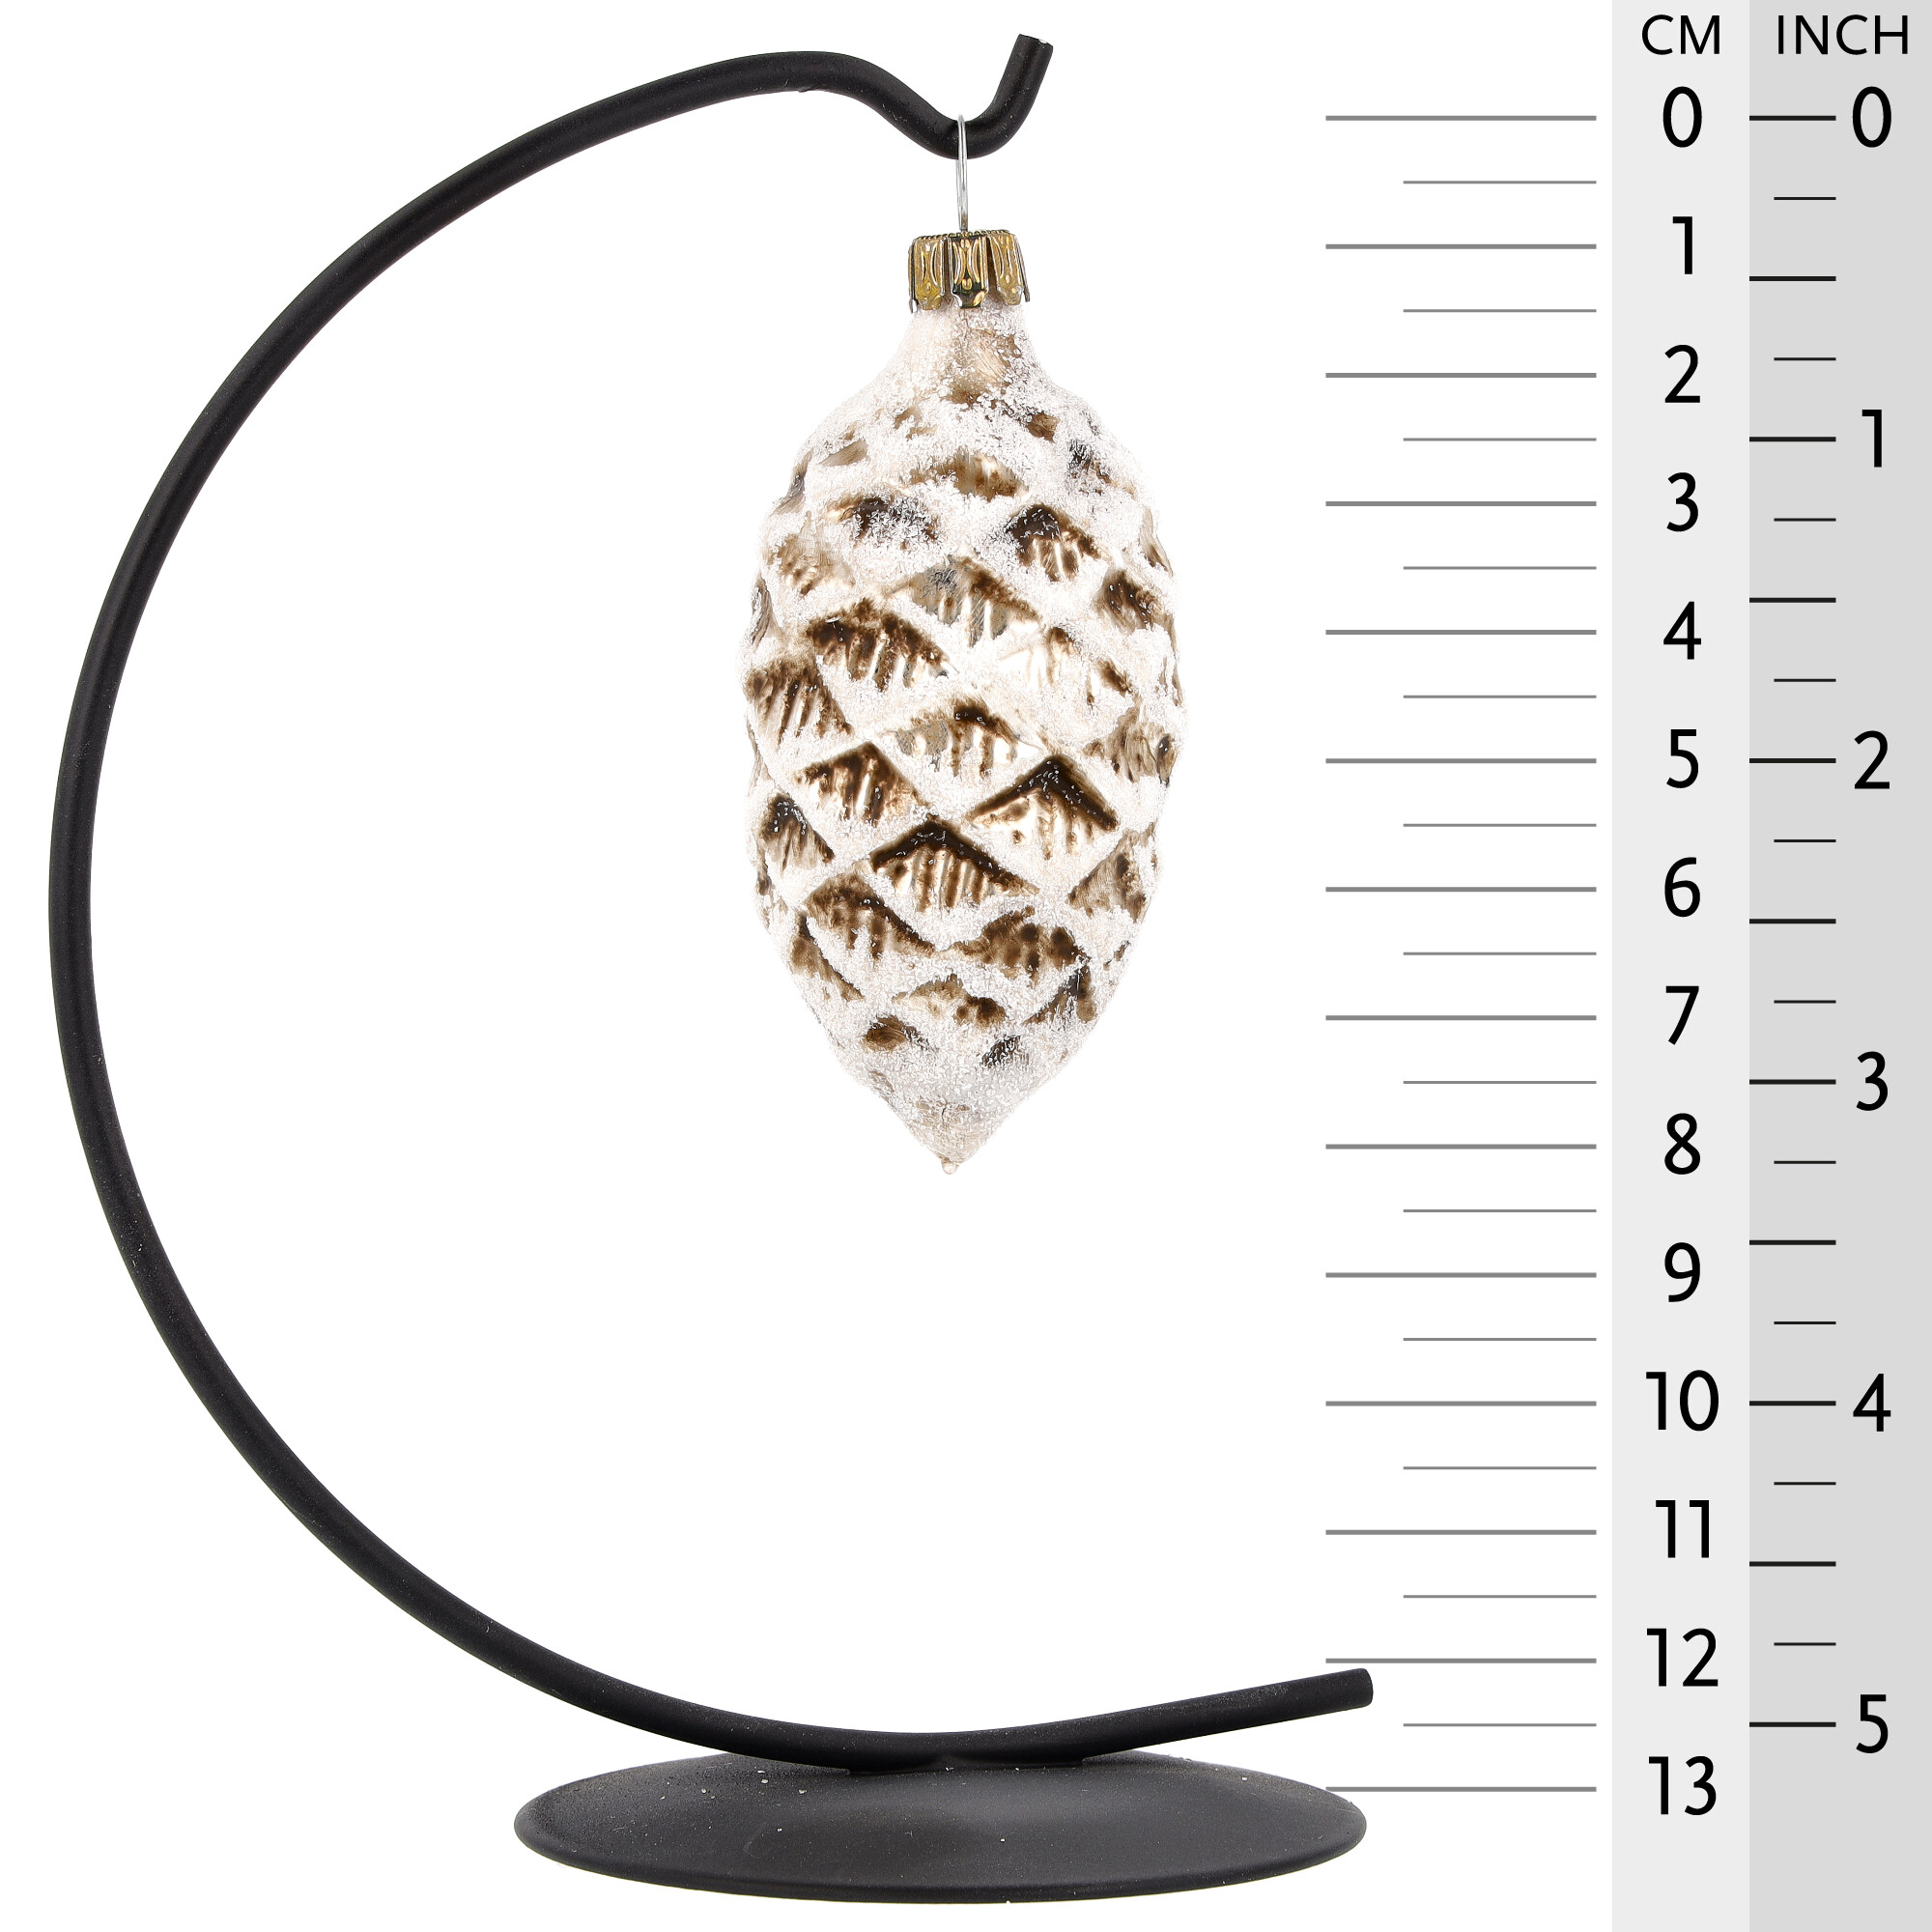 Retro Vintage style Christmas Glass Ornament - Cone with glitter